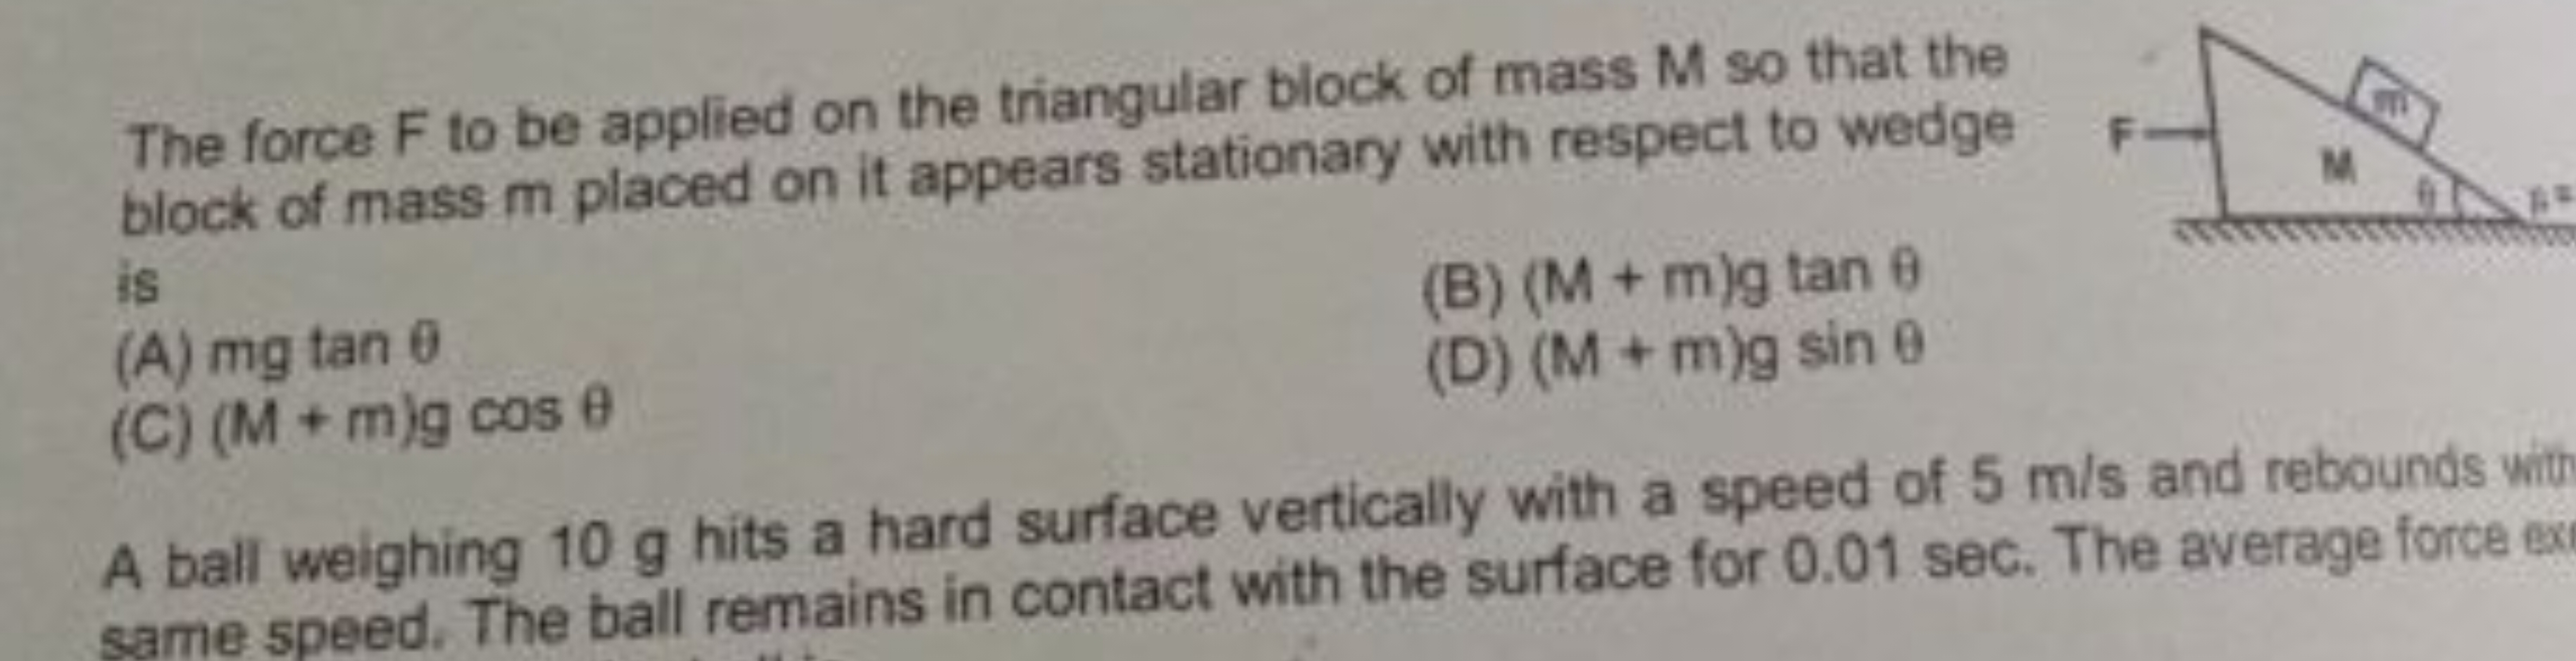 The force F to be applied on the triangular block of mass M so that th